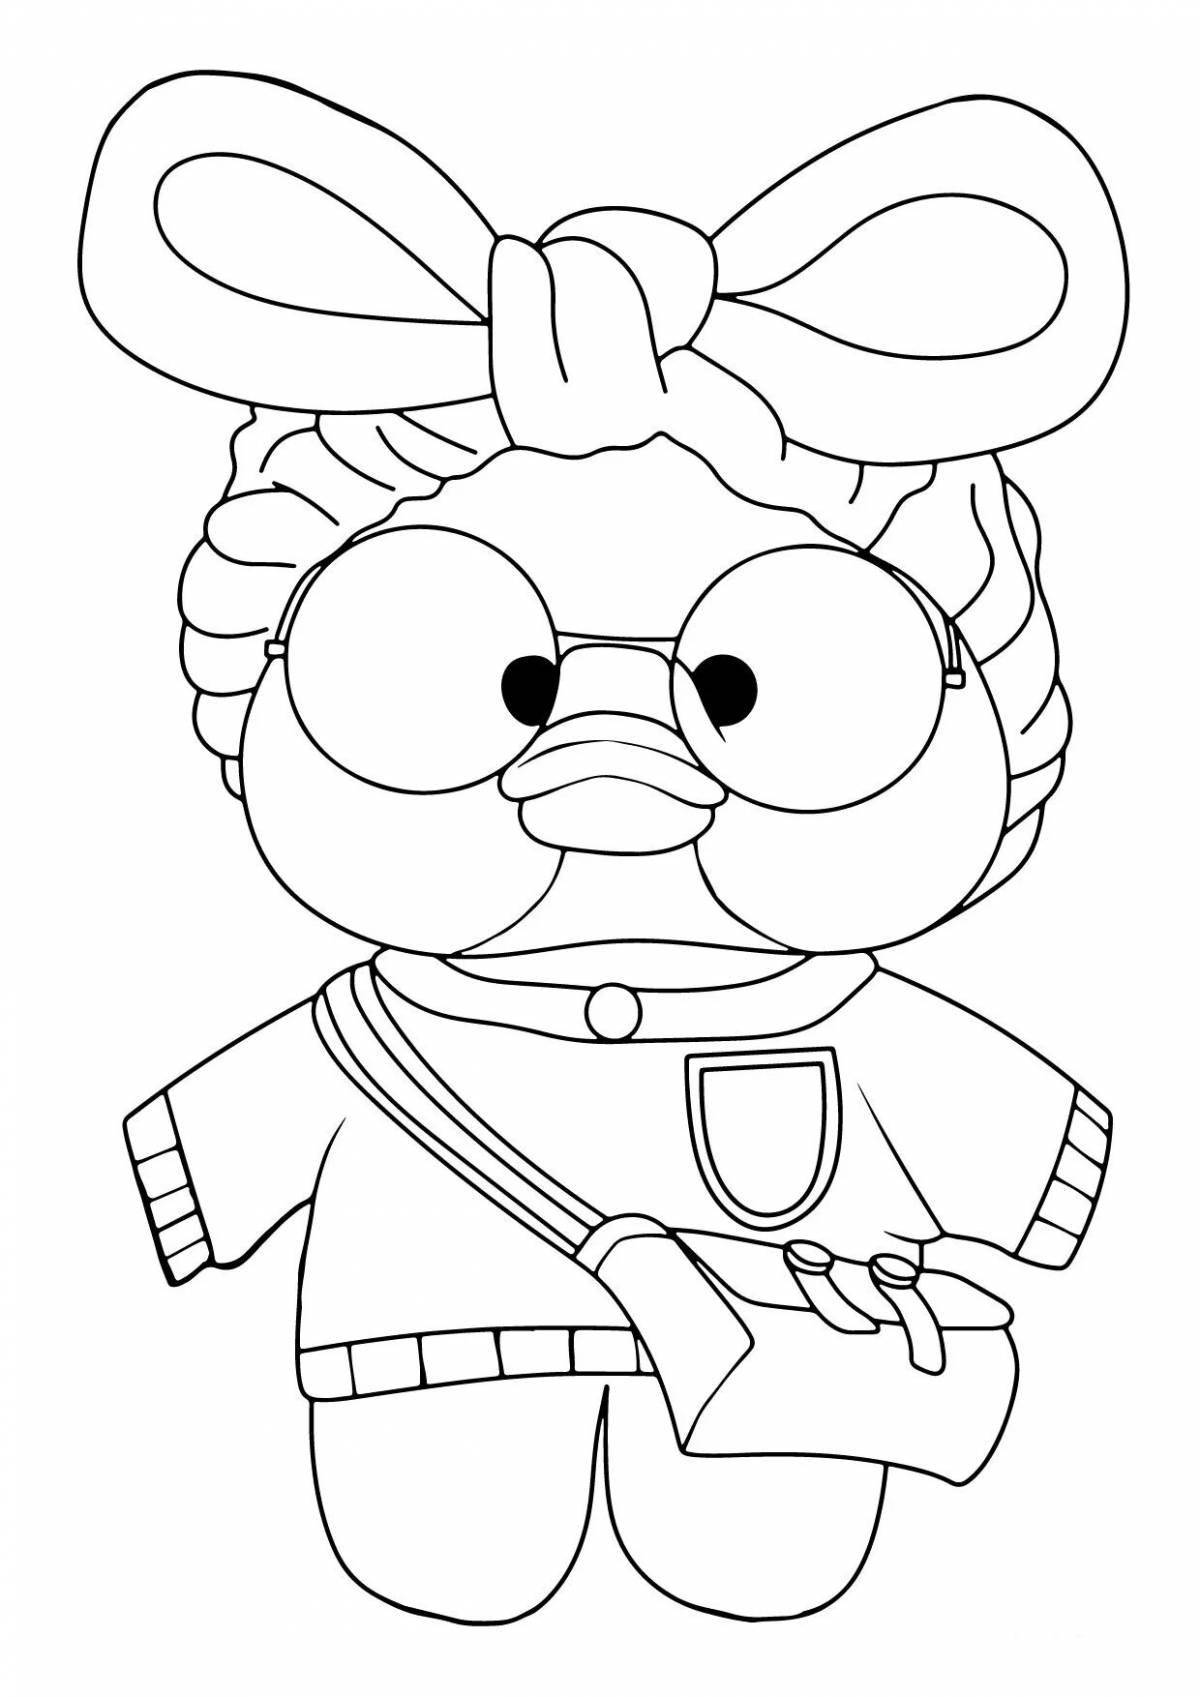 Lalafan adorable coloring book for kids